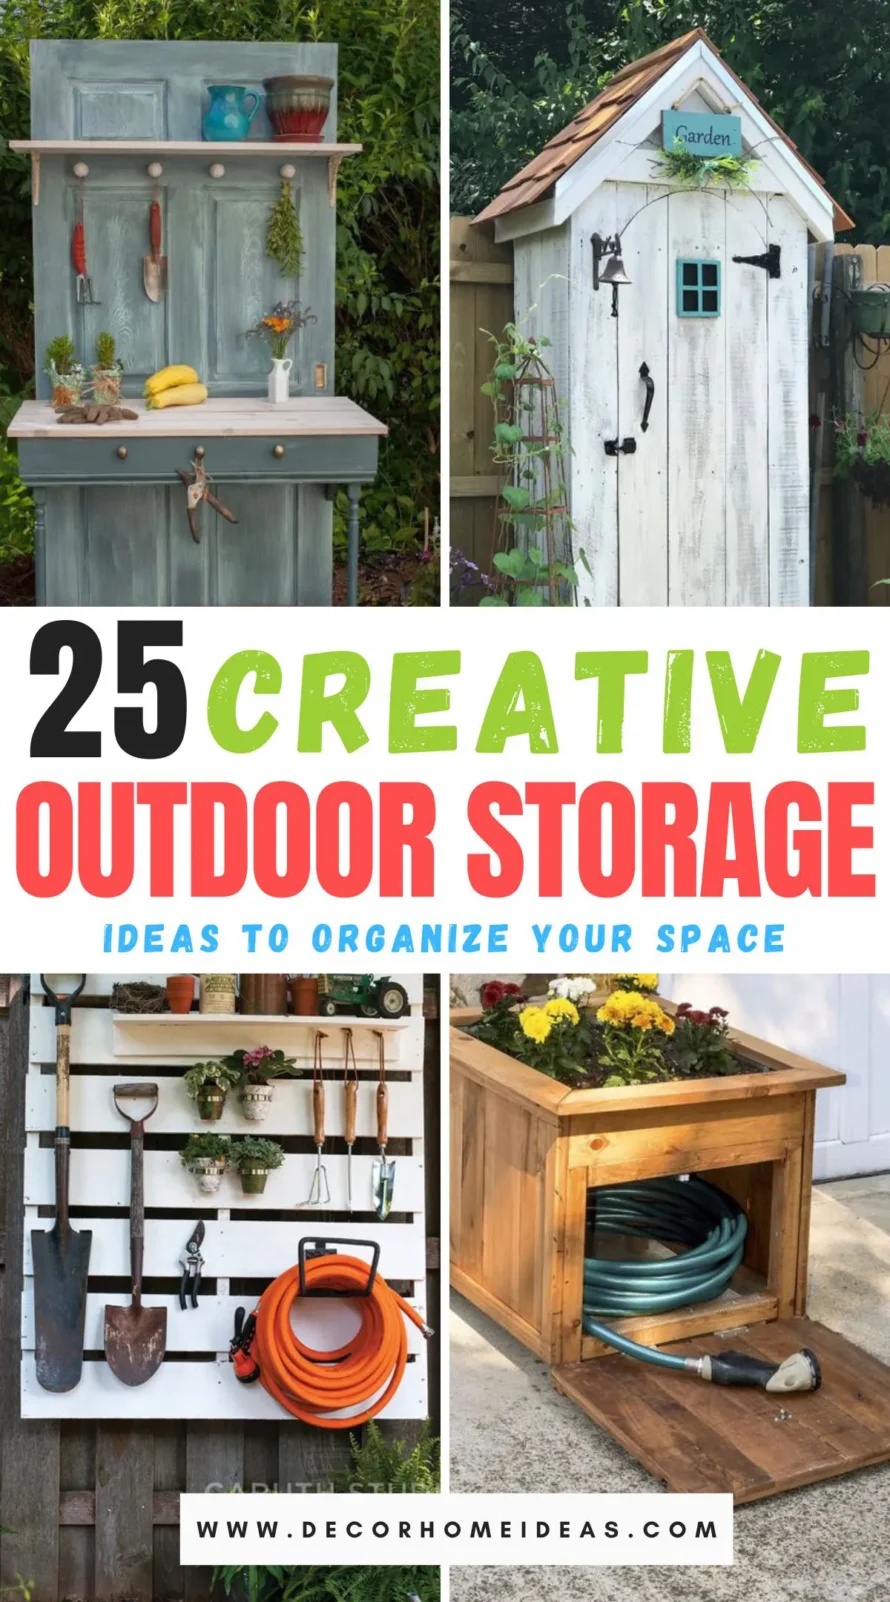 Transform your outdoor space with these 25 creative storage ideas designed to keep your patio organized and clutter-free. From stylish benches to hidden compartments, these innovative solutions offer practical storage without sacrificing aesthetics.